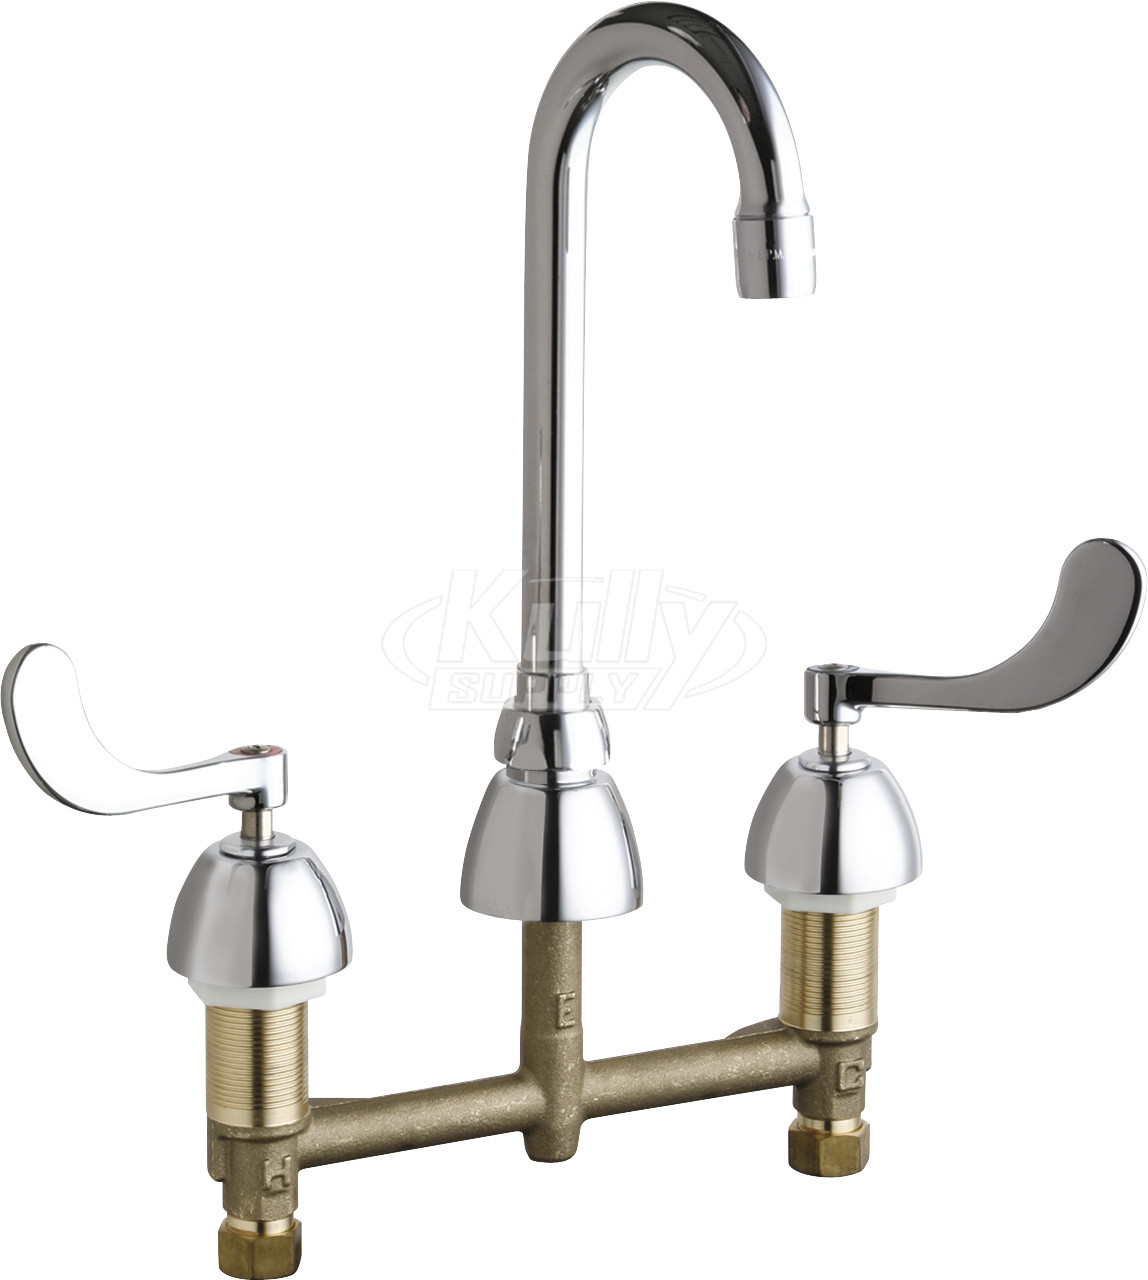 Chicago 786-GN1AE3ABCP Concealed Hot and Cold Water Sink Faucet